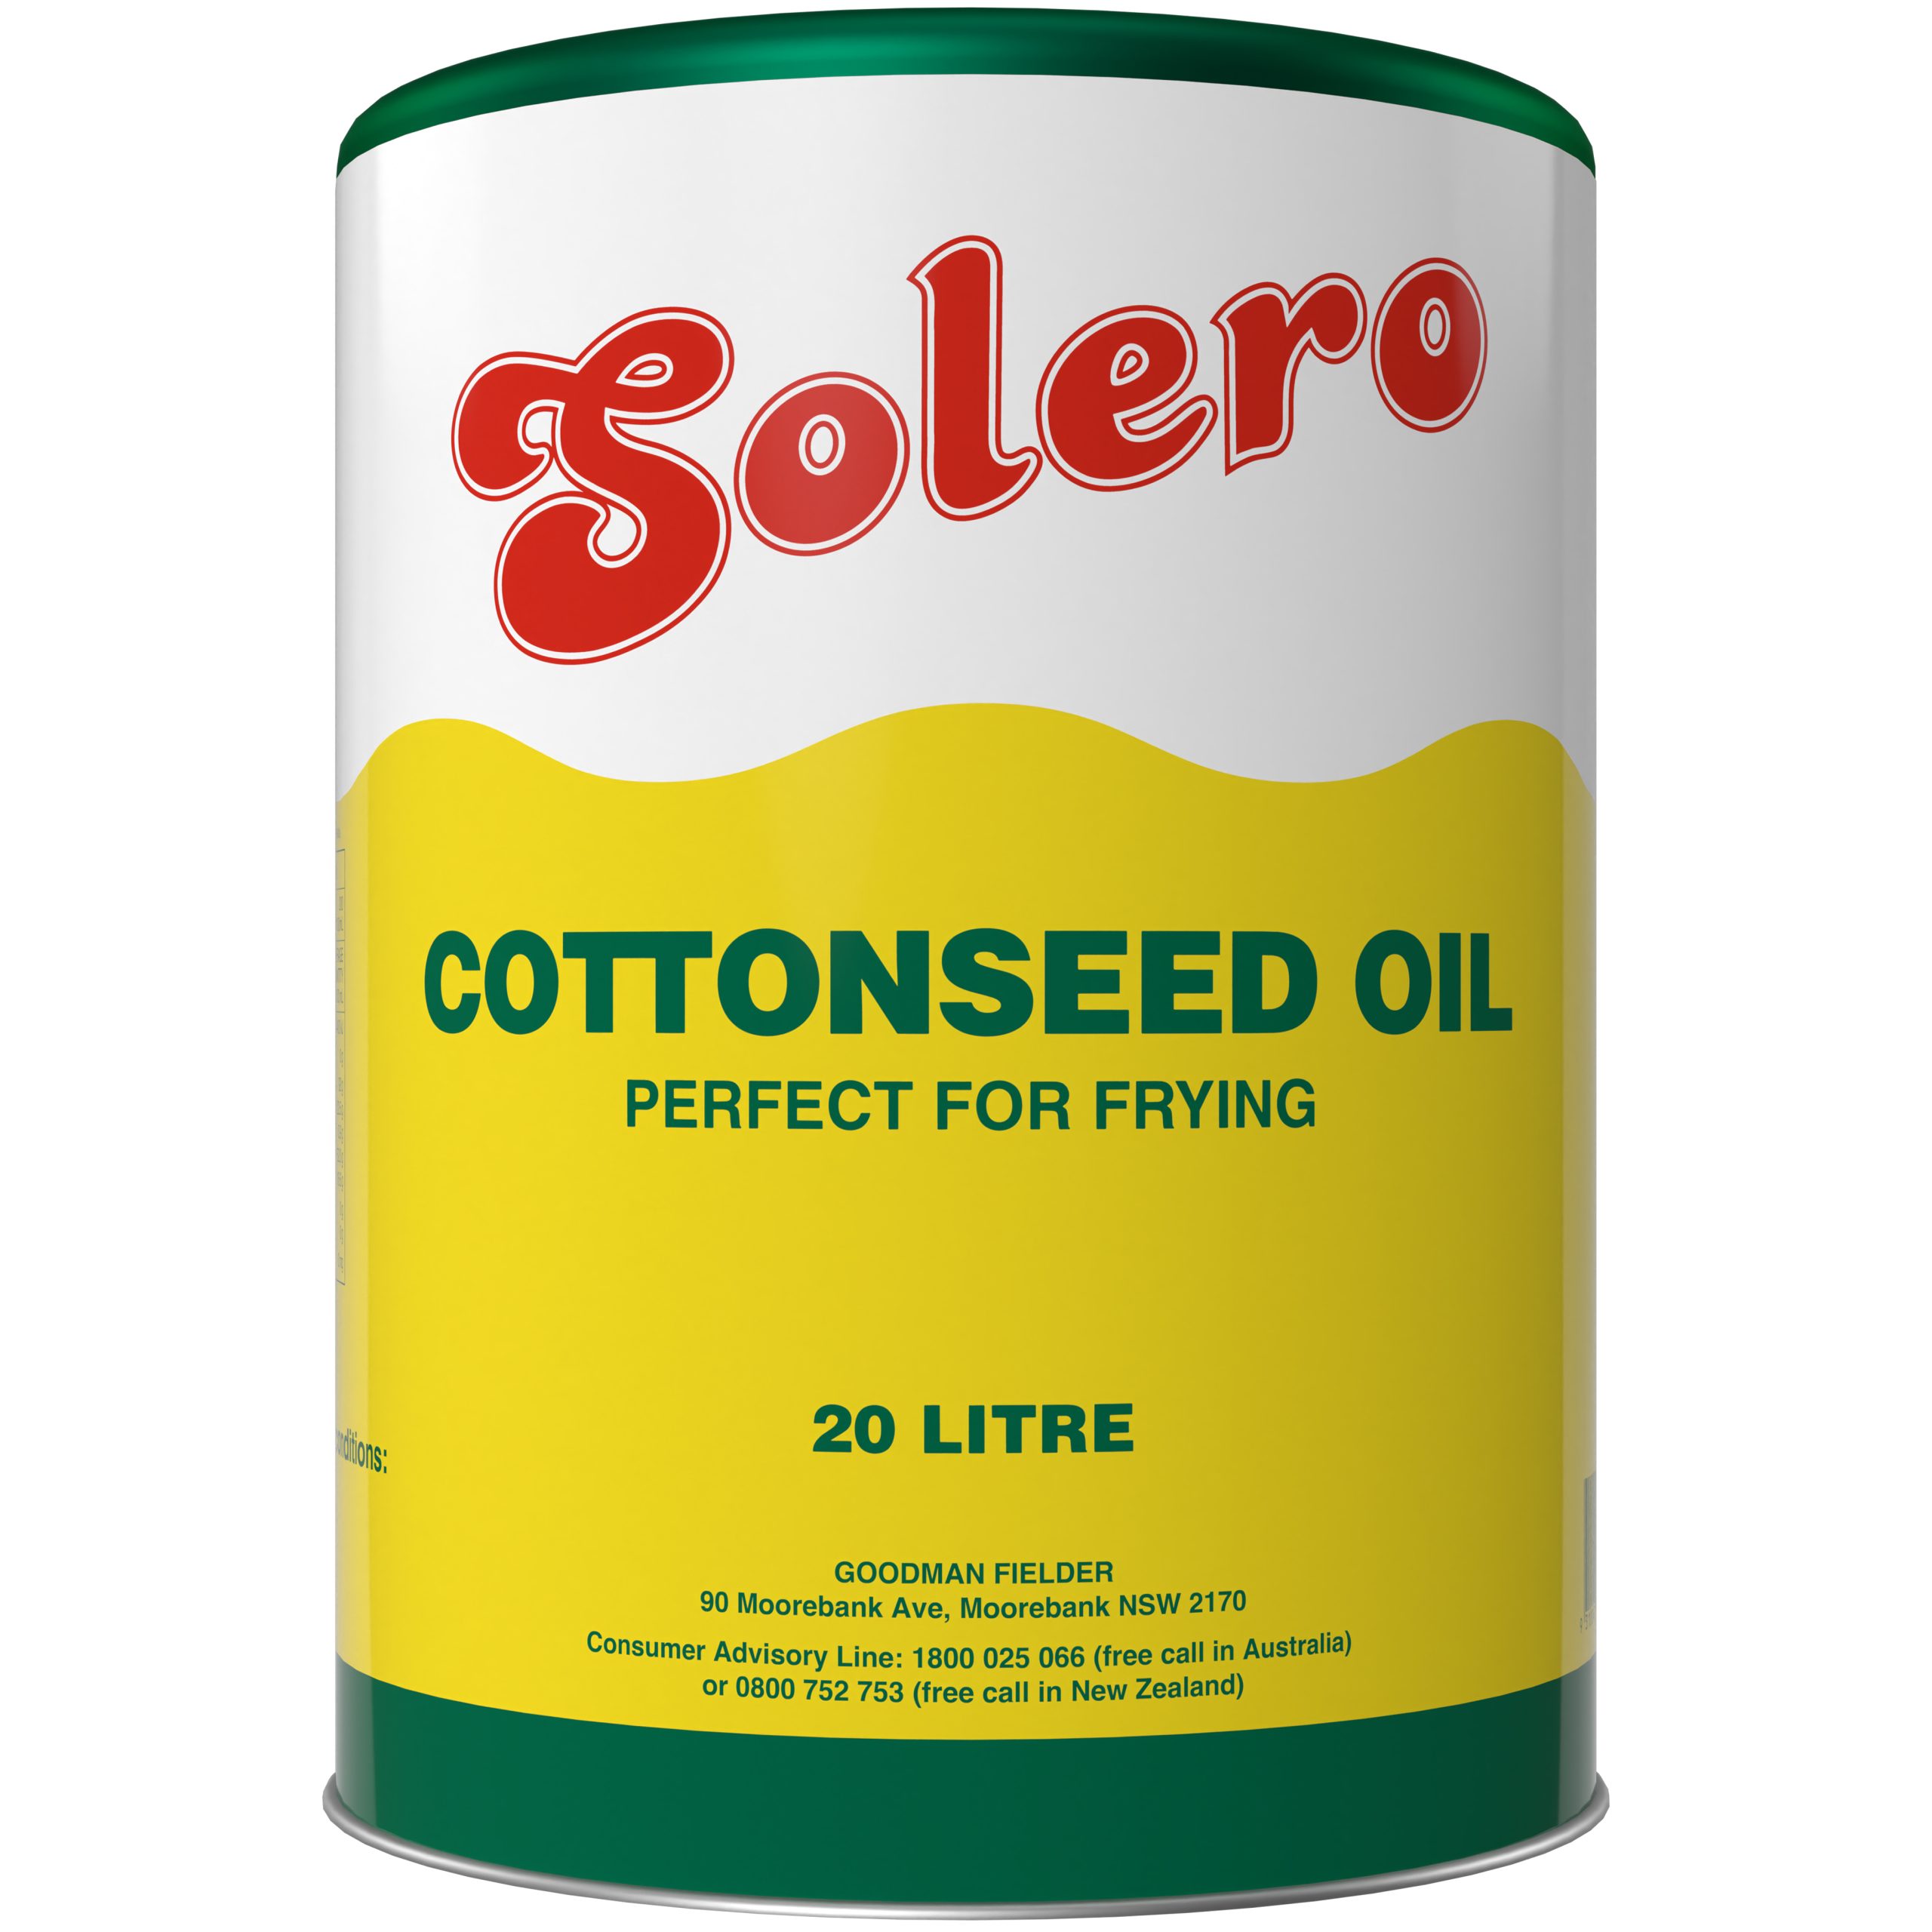 Solero Cottonseed Oil 20 Litre product photo